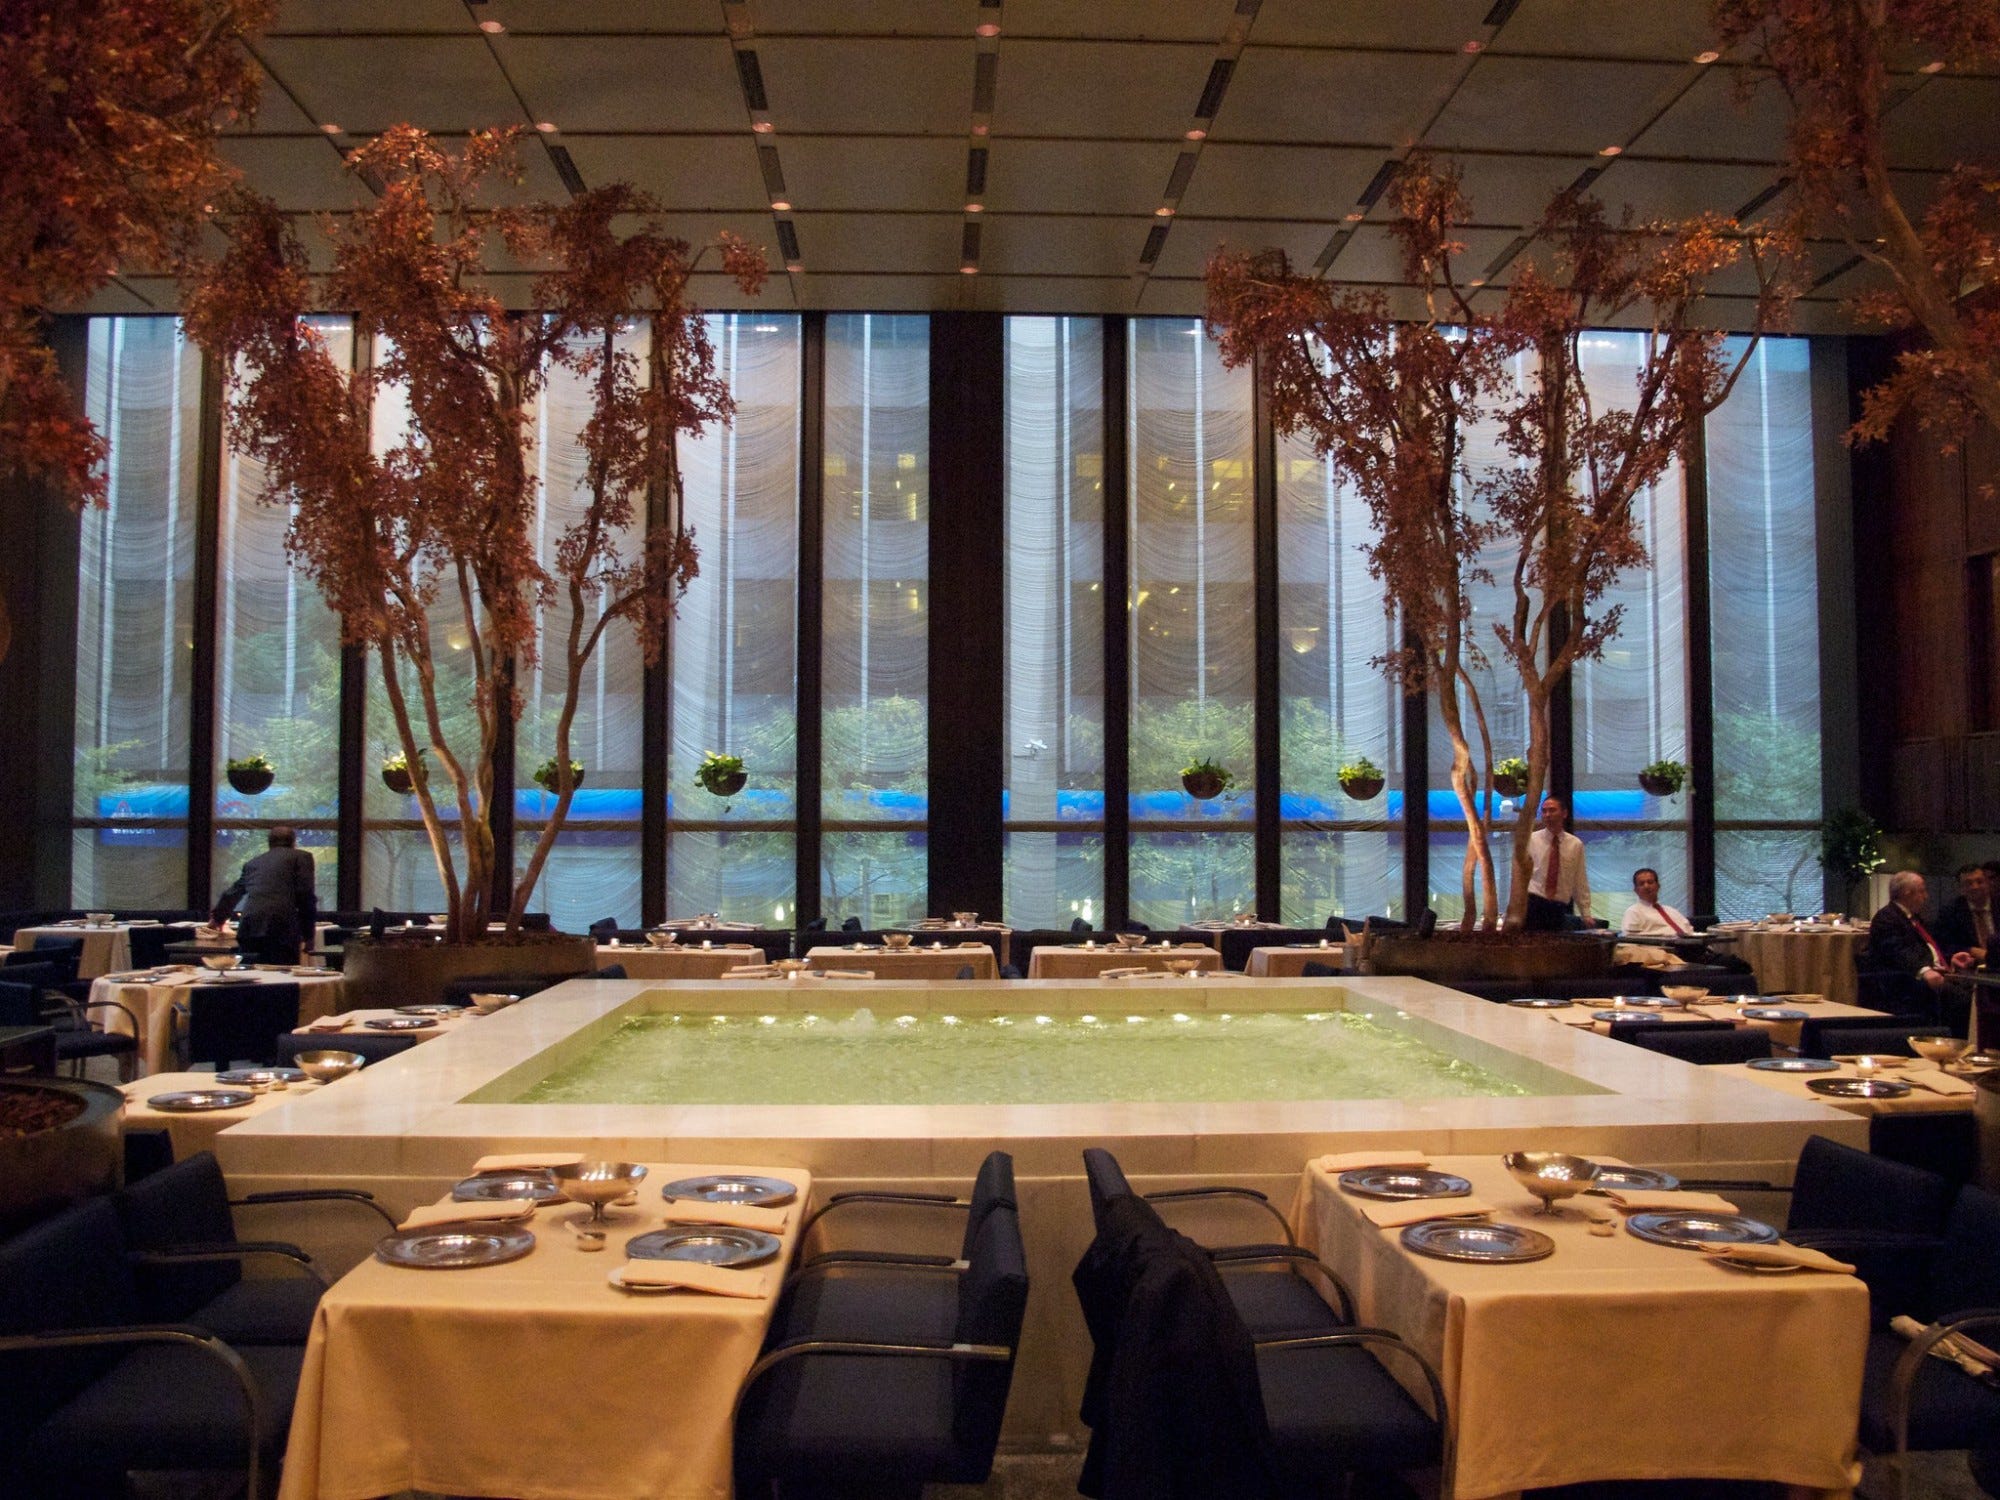 Pool centred  within the Four Seasons NYC dining room